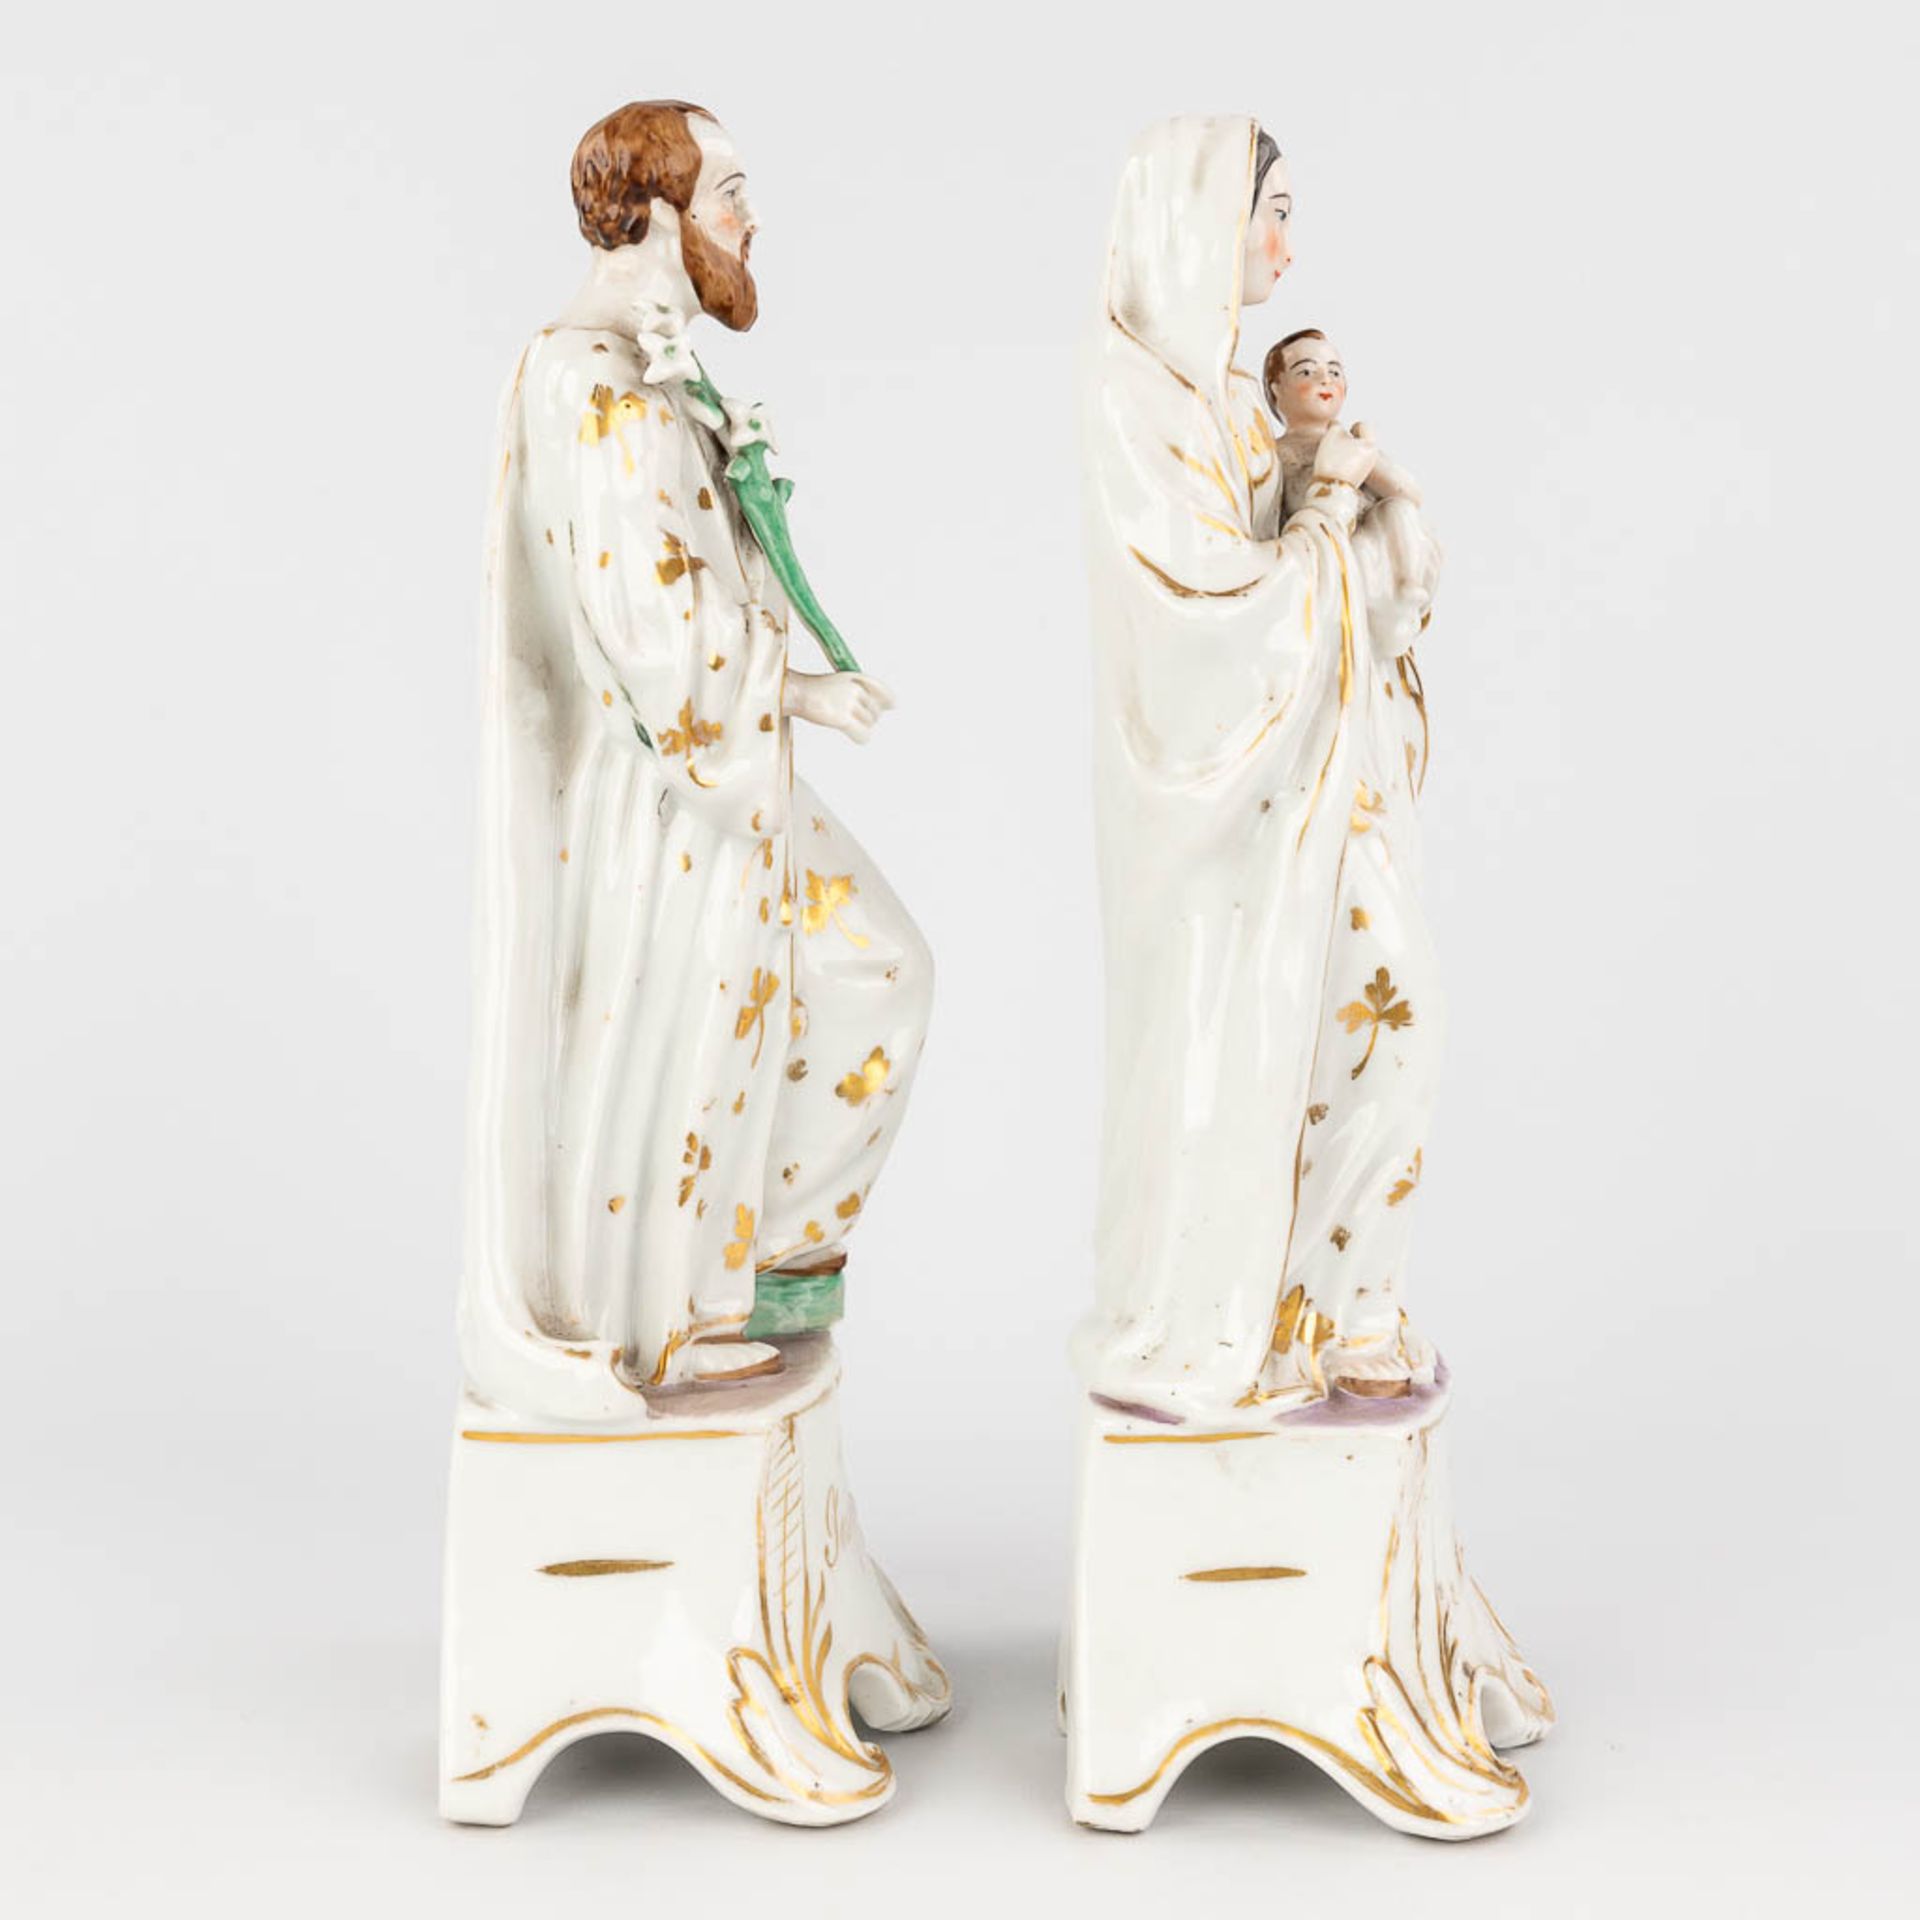 A porcelain figurine of Mary and Joseph, made in Andenne, Belgium. (H: 32 cm) - Image 4 of 13